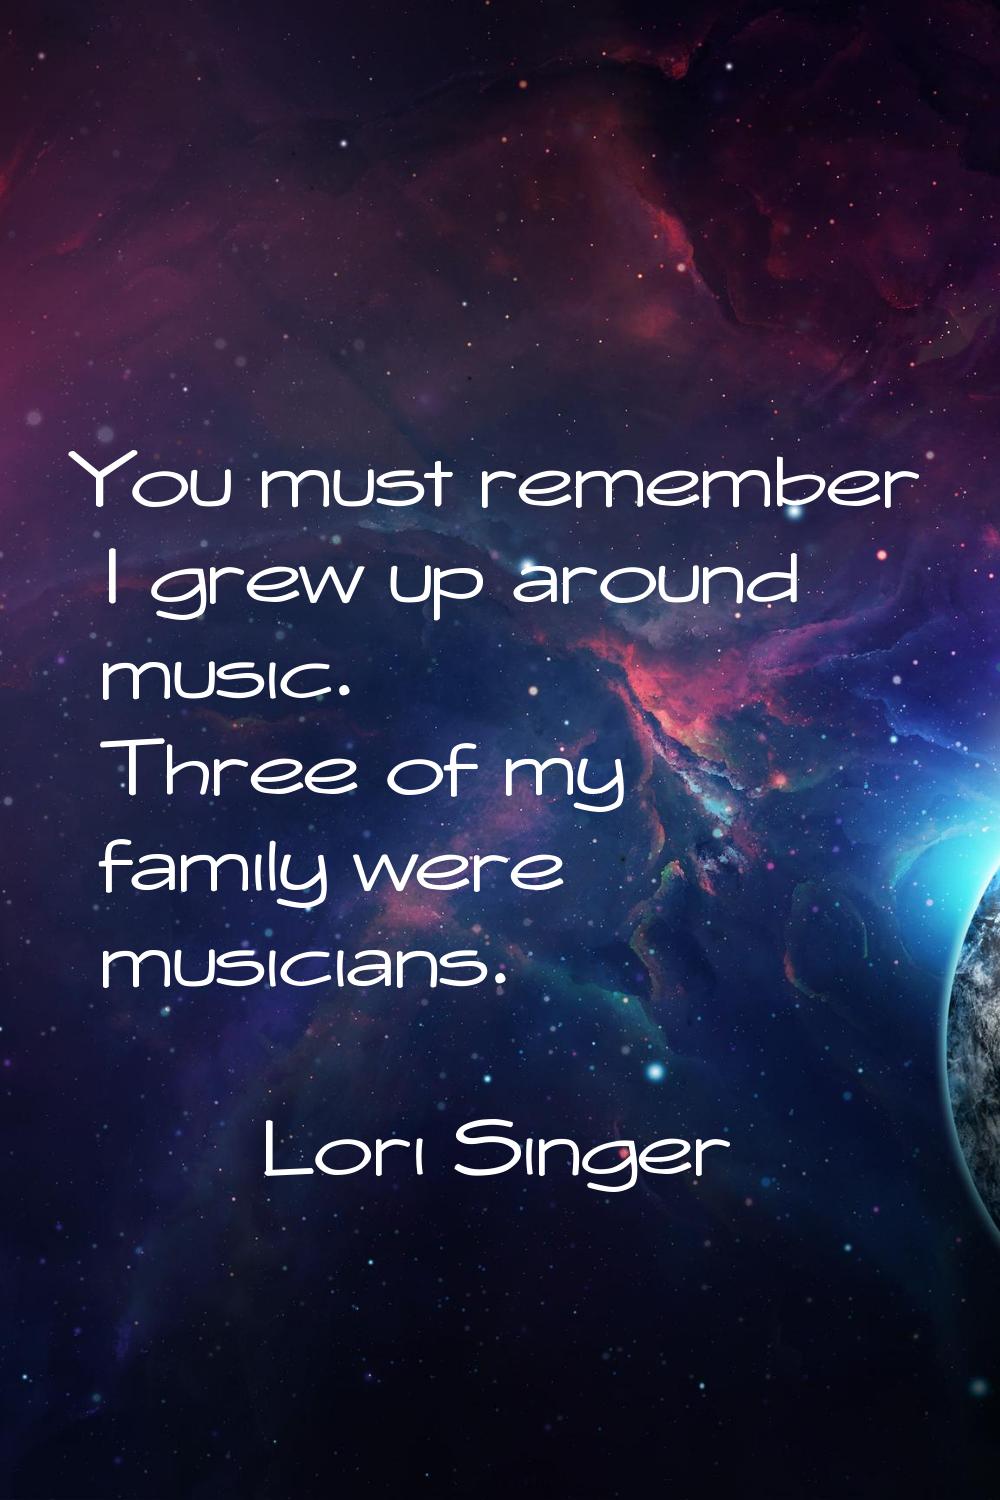 You must remember I grew up around music. Three of my family were musicians.